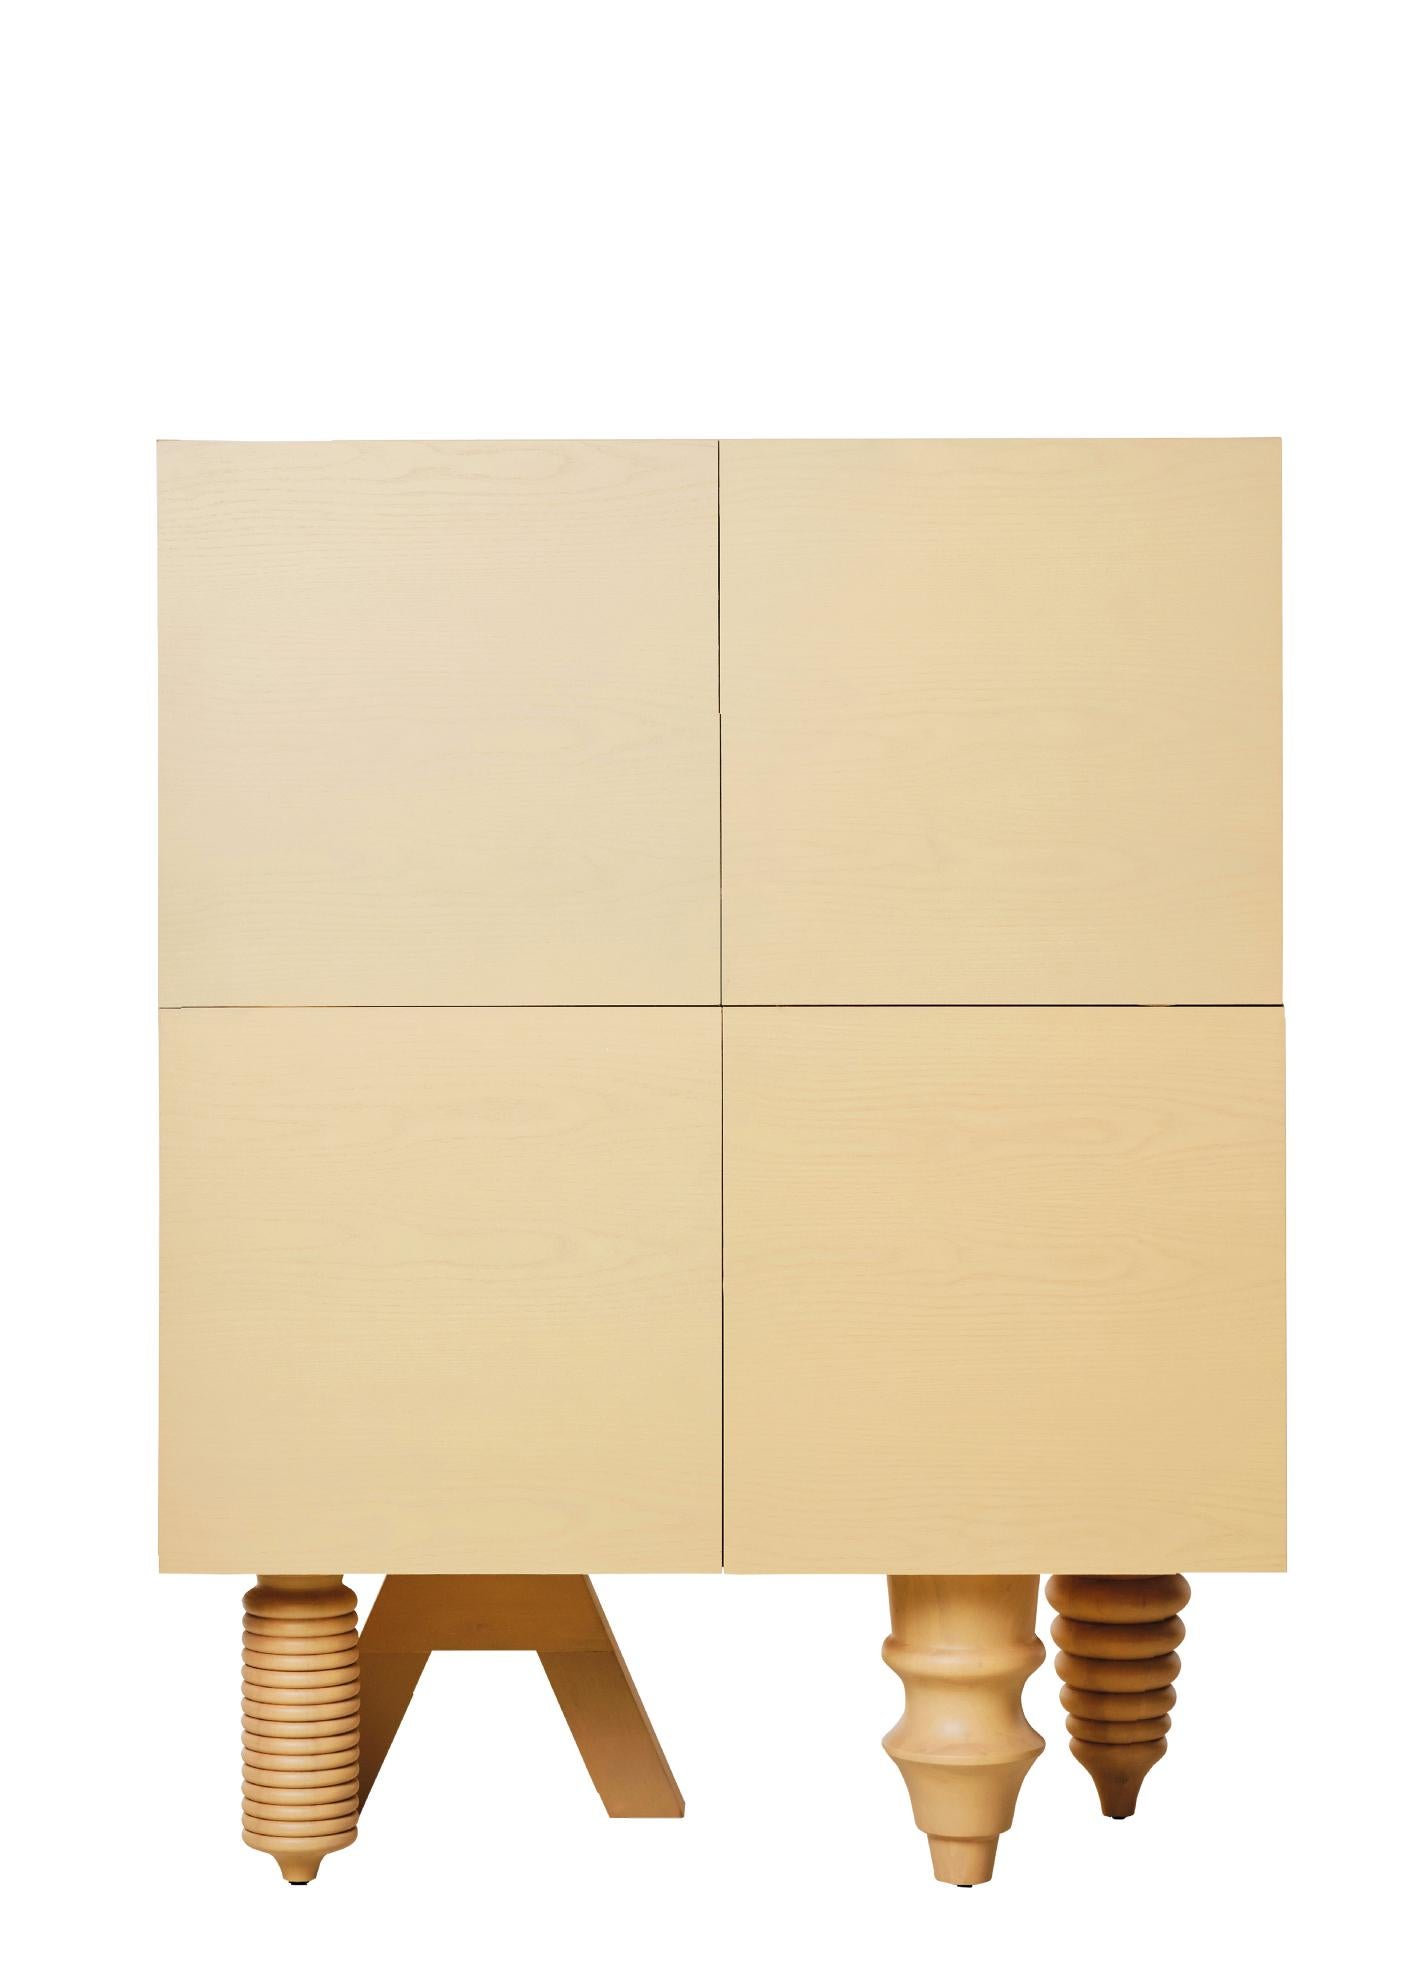 Cabinet 'Multileg' by Jaime Hayon, Yellow, 100 cm

Dimensions: 
100 x 50 x 130 cm 
39,4 x 19,6 x 51'2 ”

Model presented:
Ash Top 1 m (yellow color)
Module 2D
Module 1B
4 Legs

The Multileg is more than modular. Designed in 2006, Jaime Hayon’s